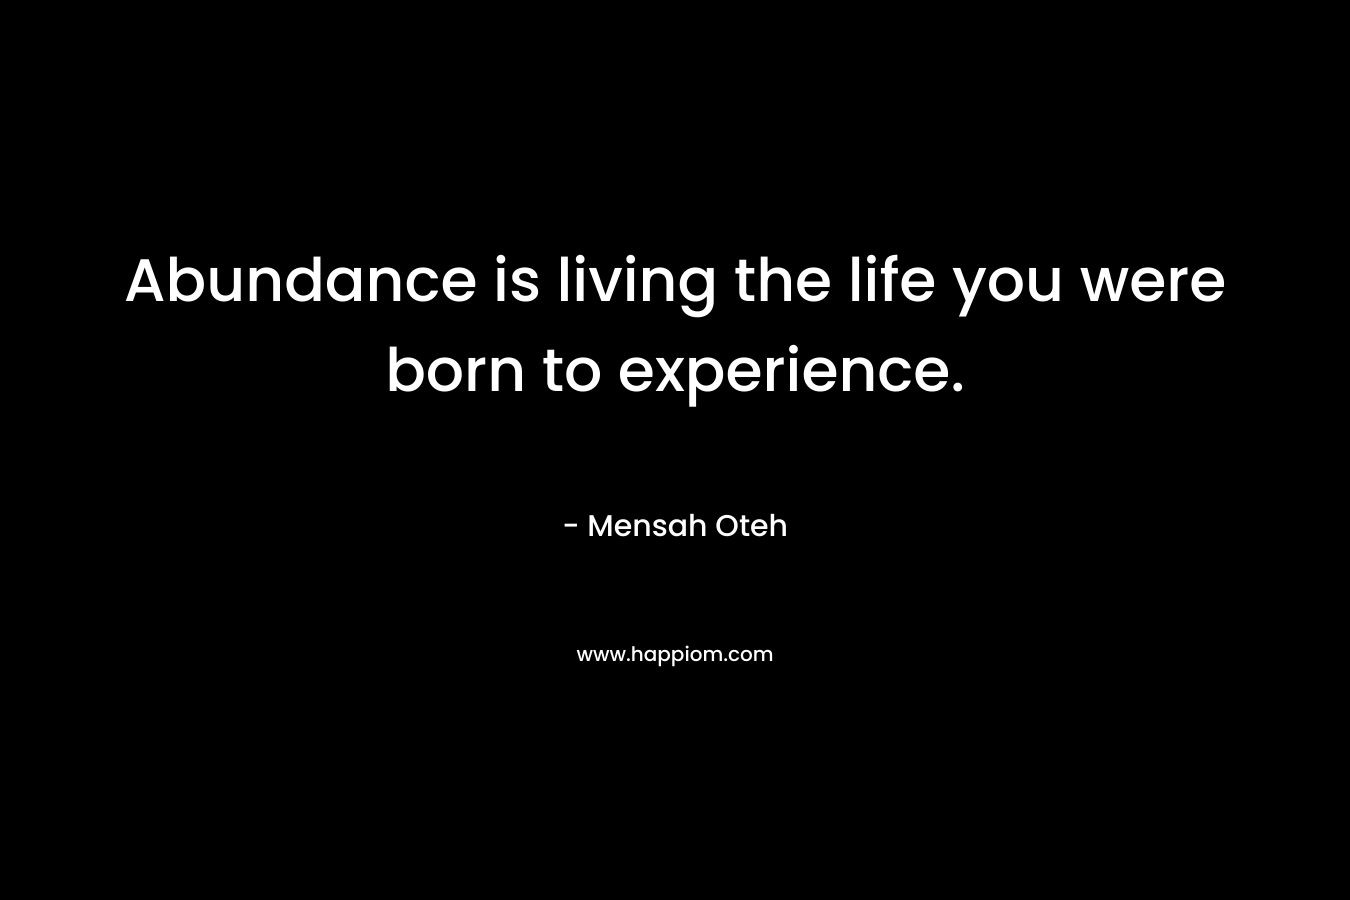 Abundance is living the life you were born to experience.